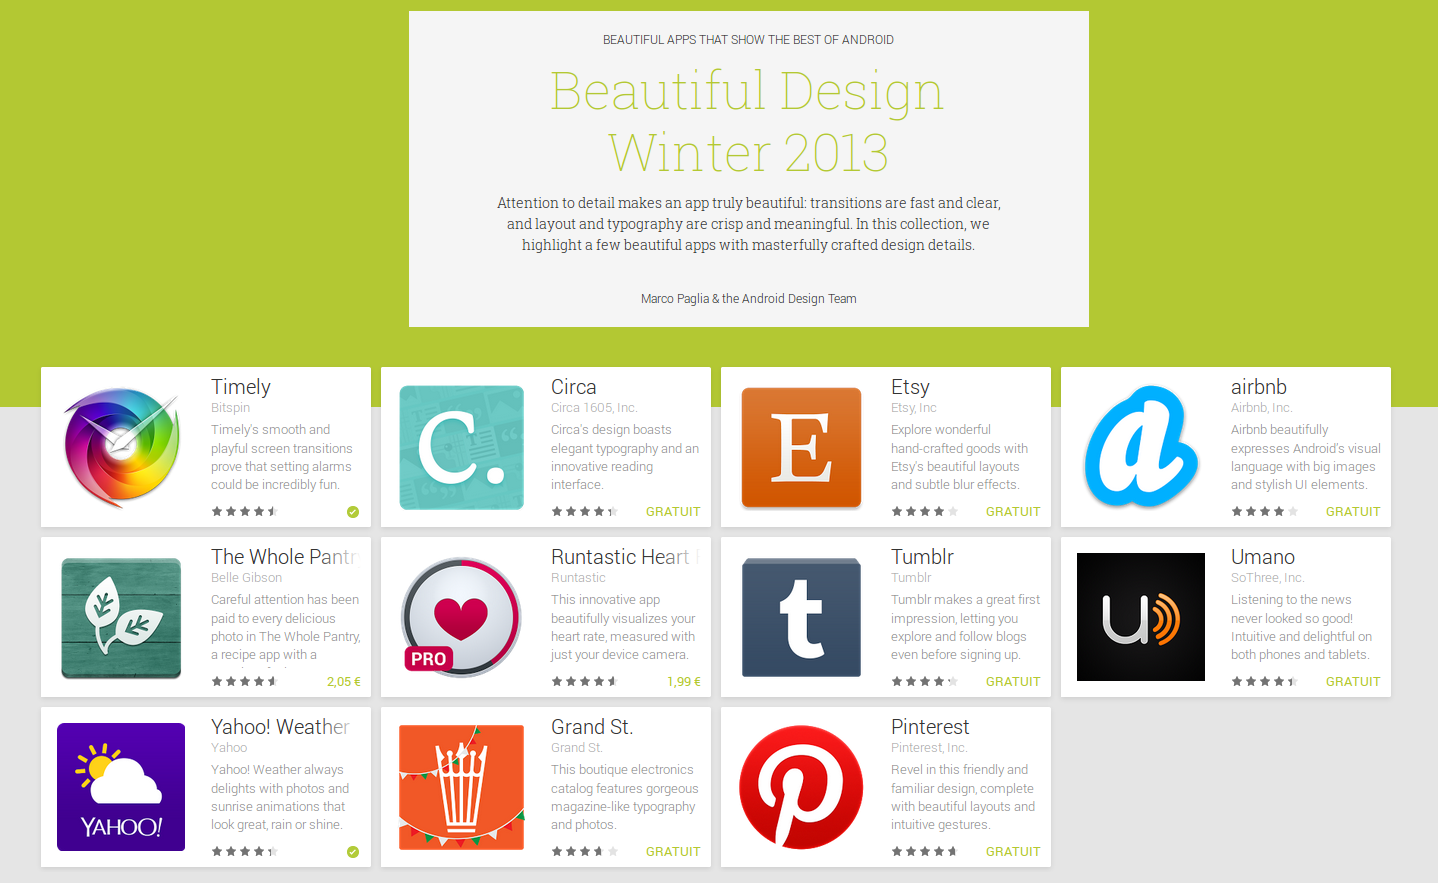 La collection d'application Android Beautiful Design Winter 2013